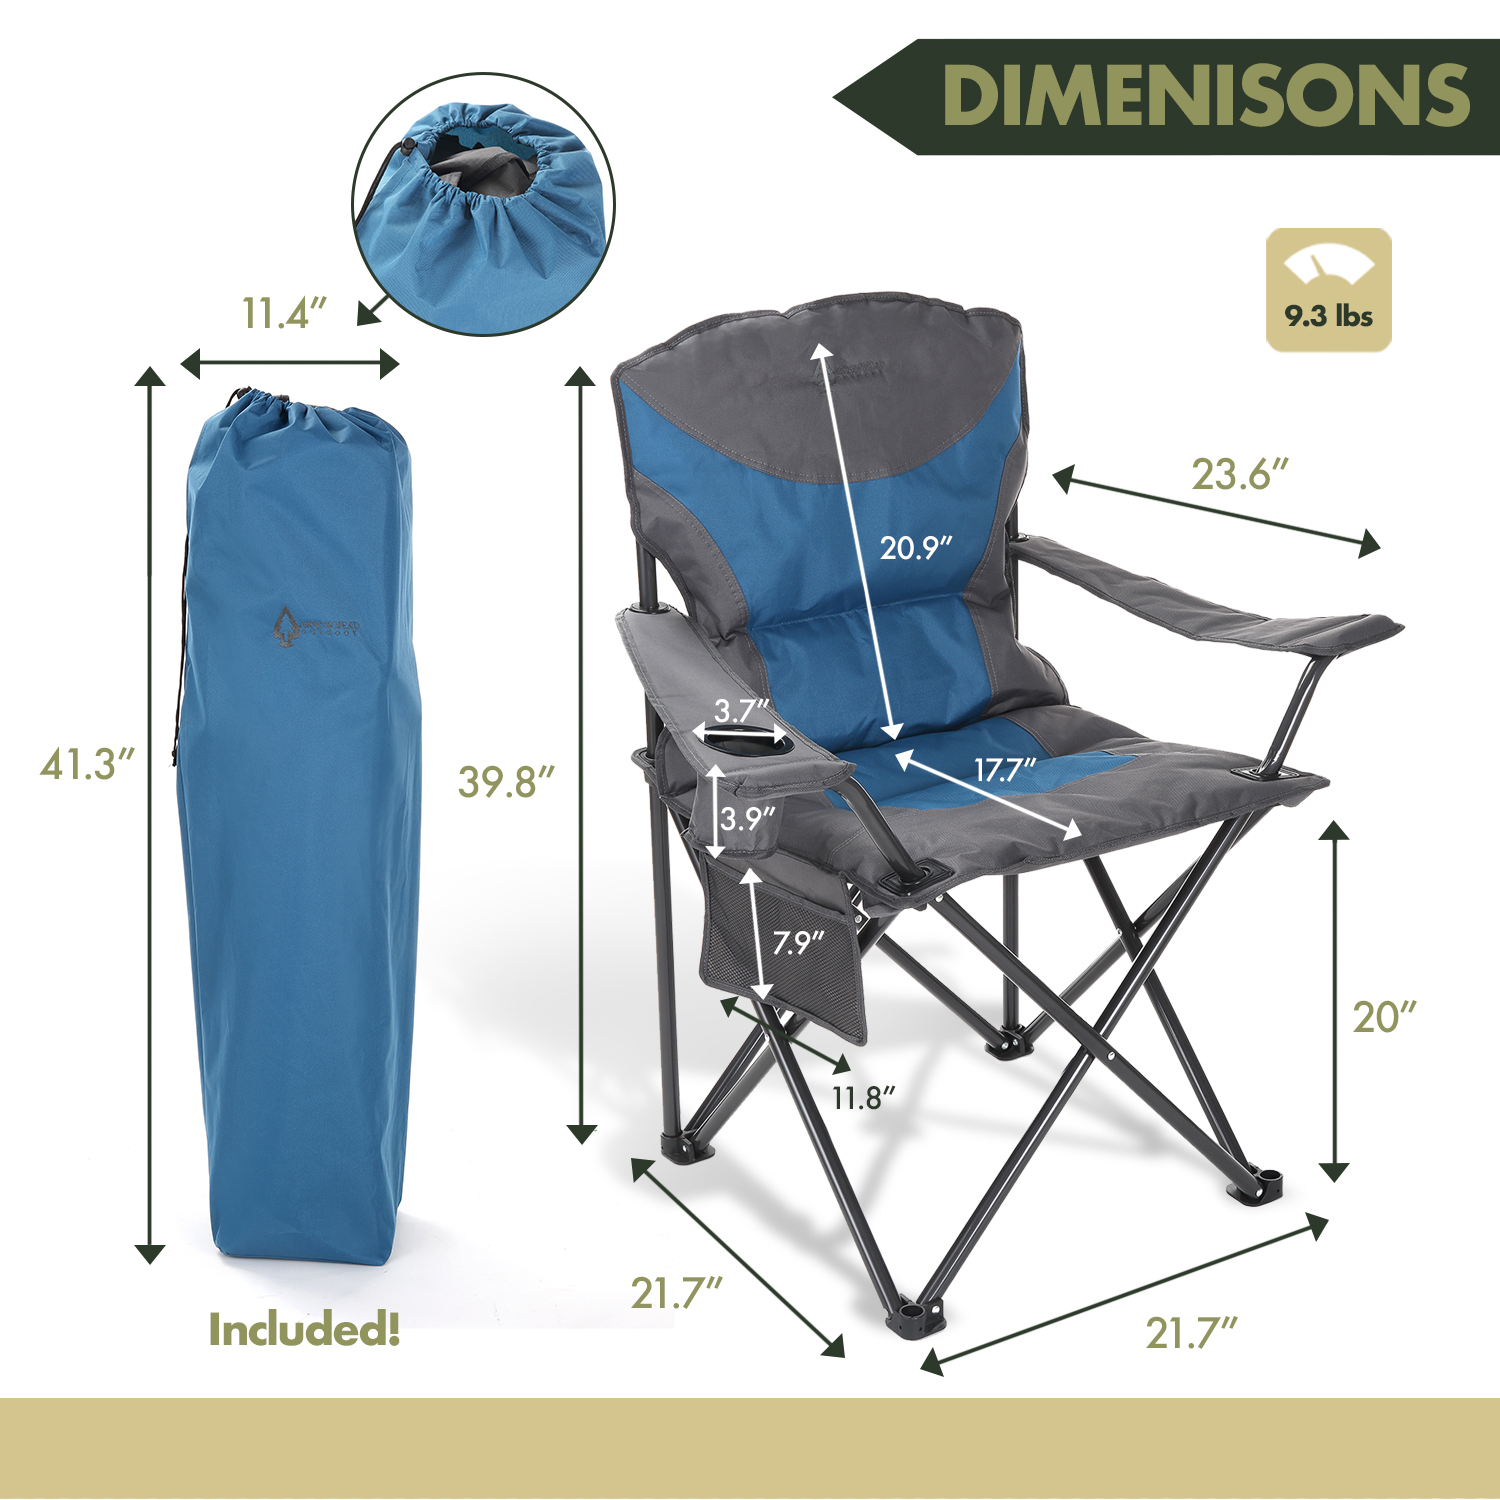 ARROWHEAD OUTDOOR Portable Folding Camping Quad Chair w/Added Ultra-Comfortable  Padding, Cup-Holder, Heavy-Duty Carrying Bag, Padded Armrests, Supports up  to 330lbs, USA-Based Support (Blue  Gray)